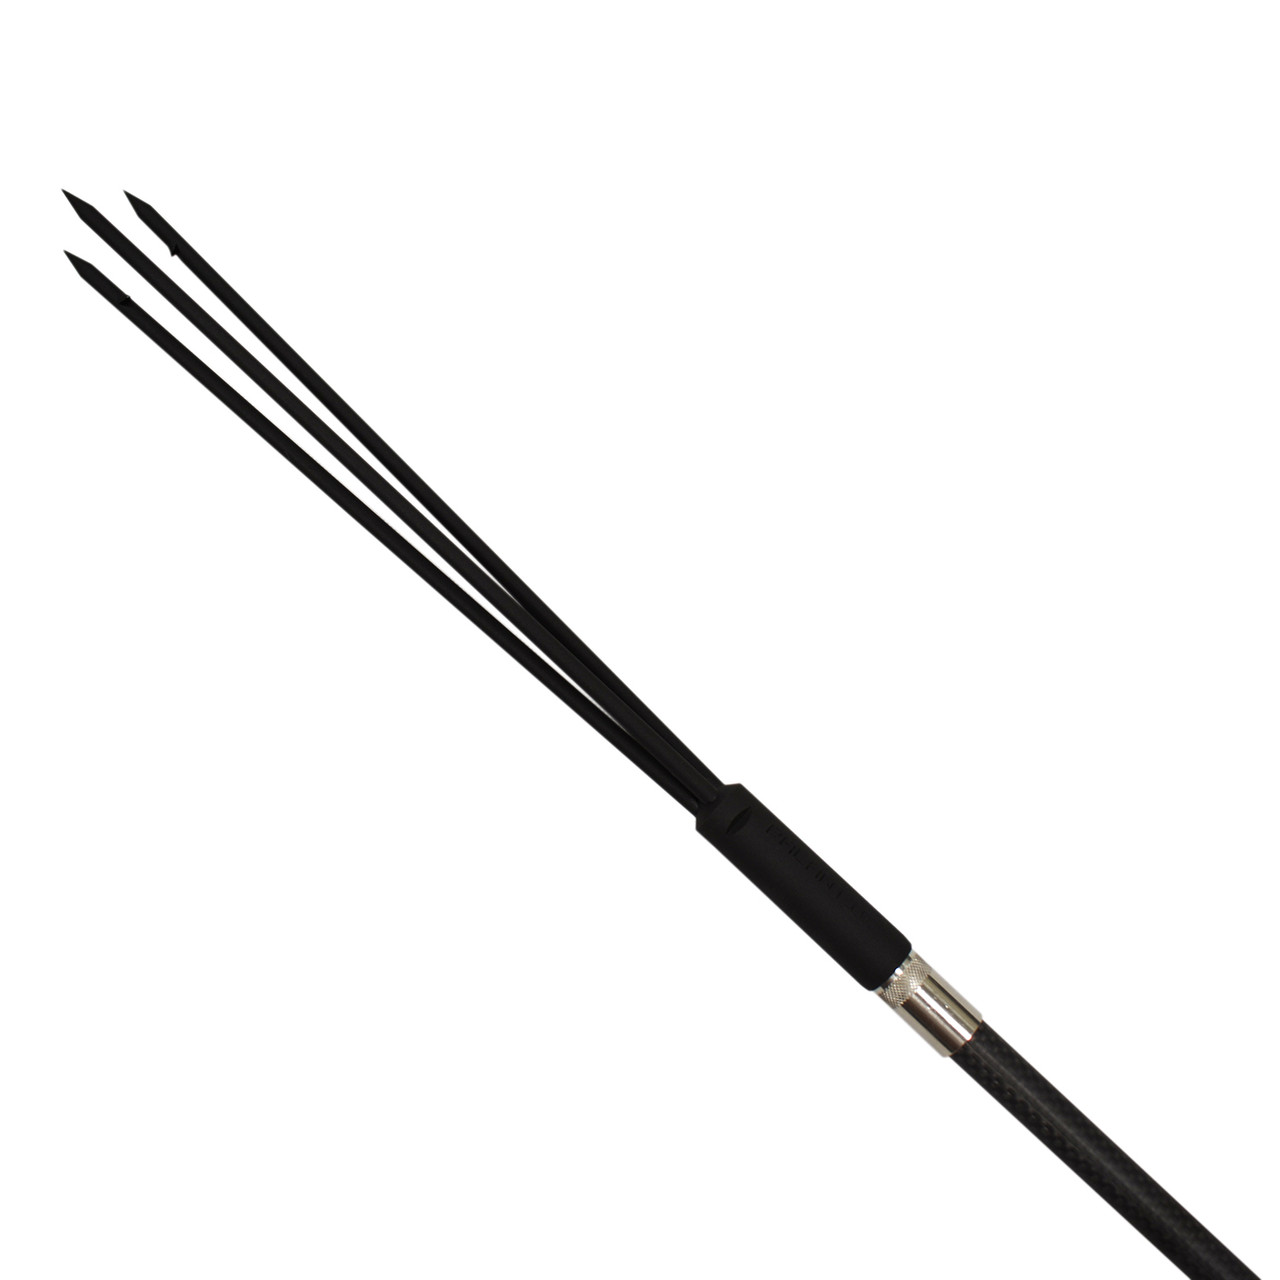 HEAVY DUTY CARBON FIBER 5' Travel Spearfishing One Piece Pole Spear 3 Prong  Tip - scubachoice